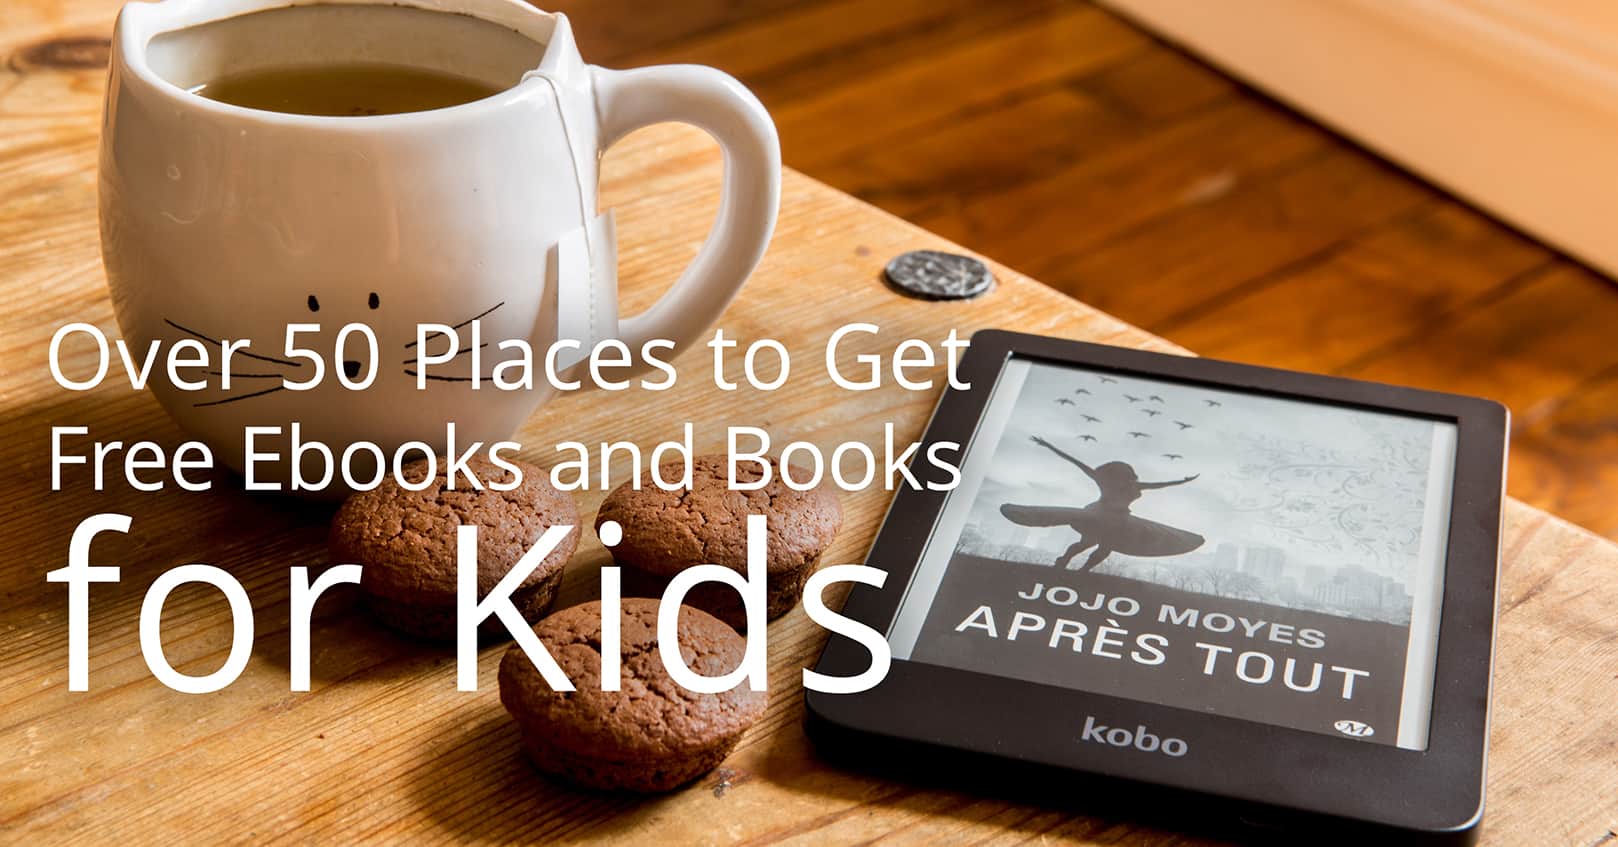 Get Free Ebooks and Books for Kids